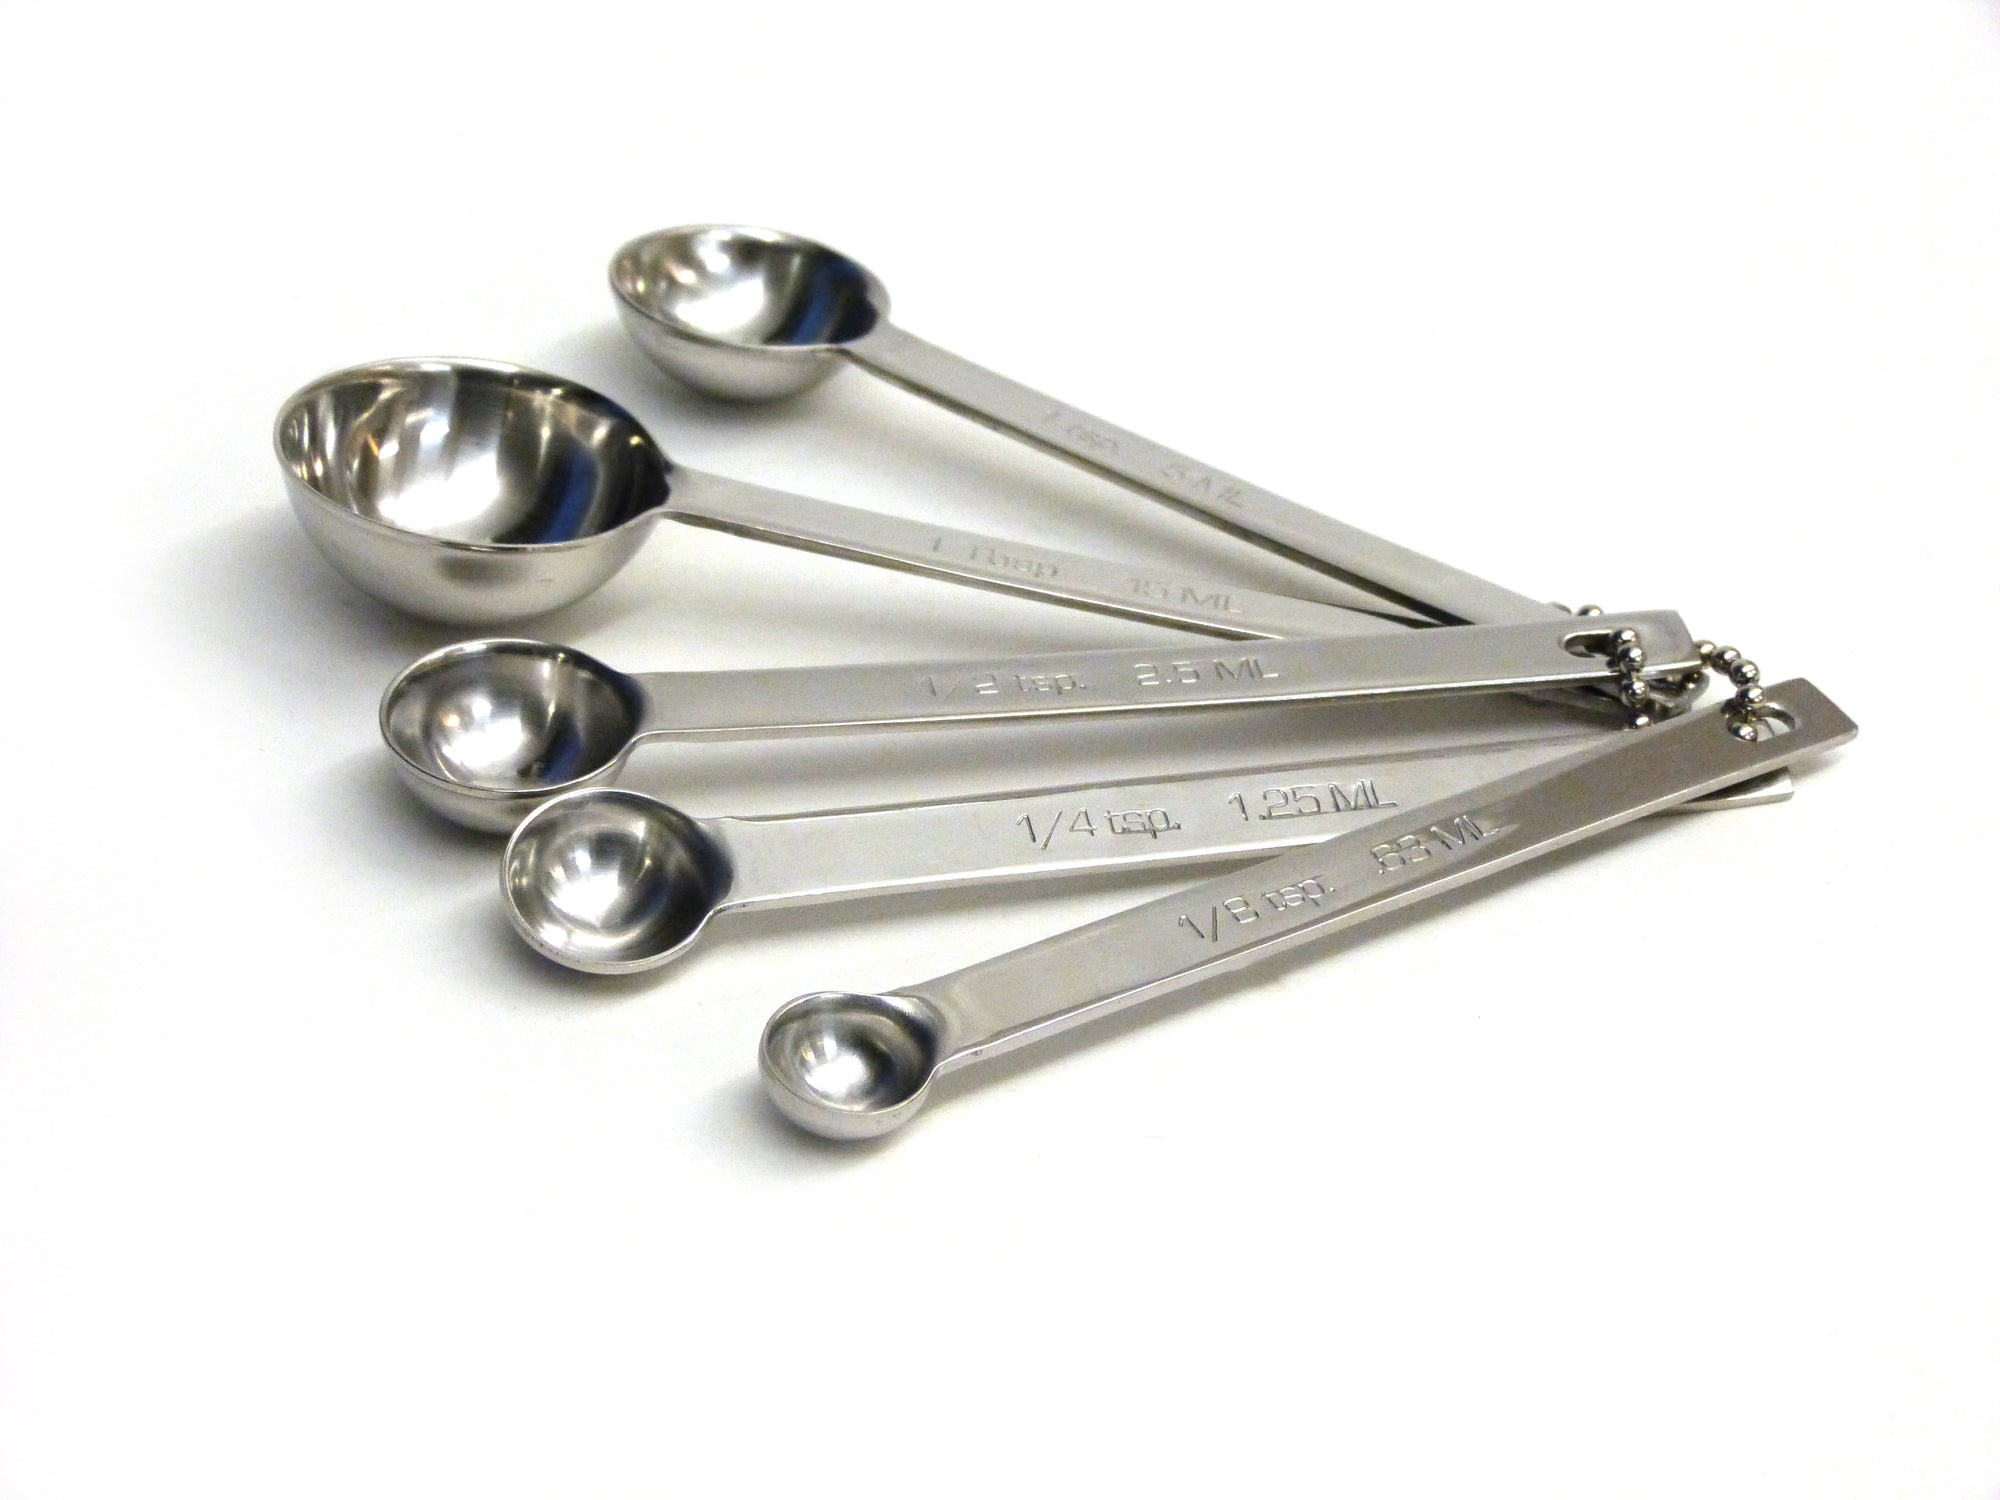  Norpro Mini Stainless Steel Measuring Spoons, Set of 5